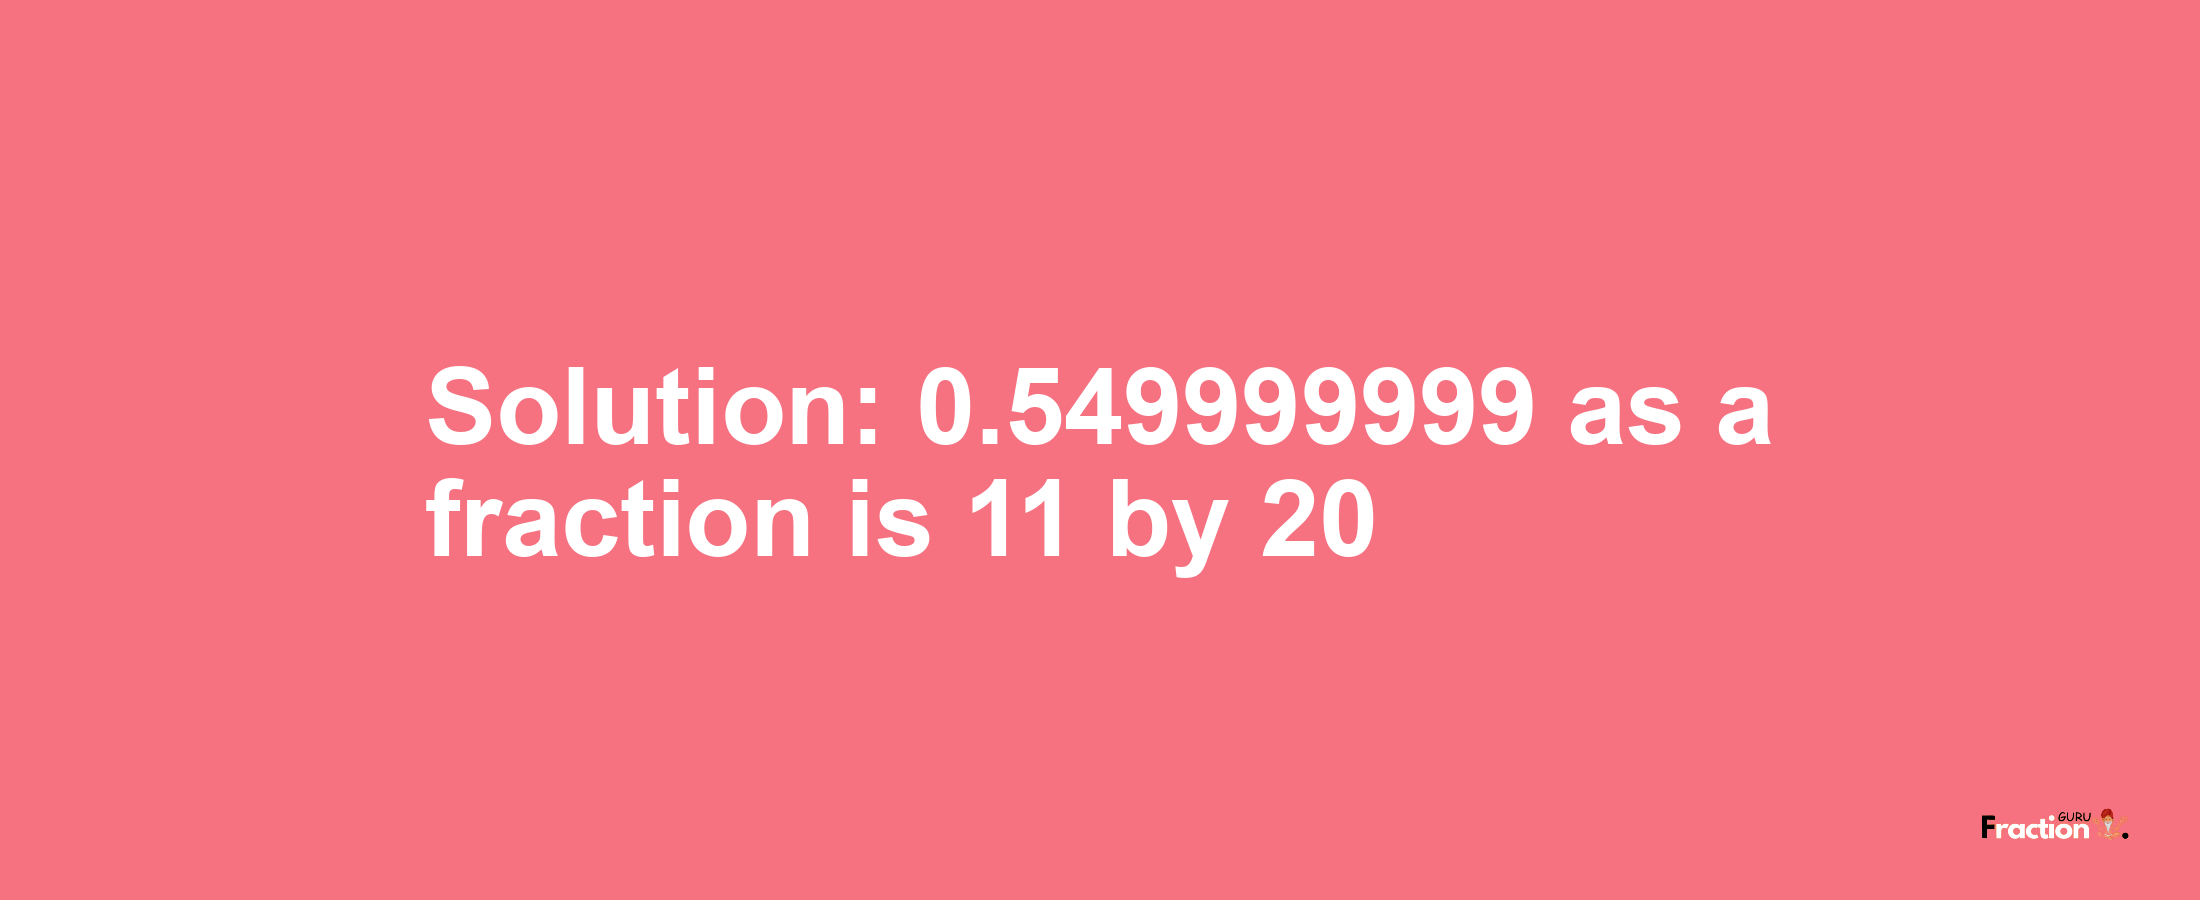 Solution:0.549999999 as a fraction is 11/20